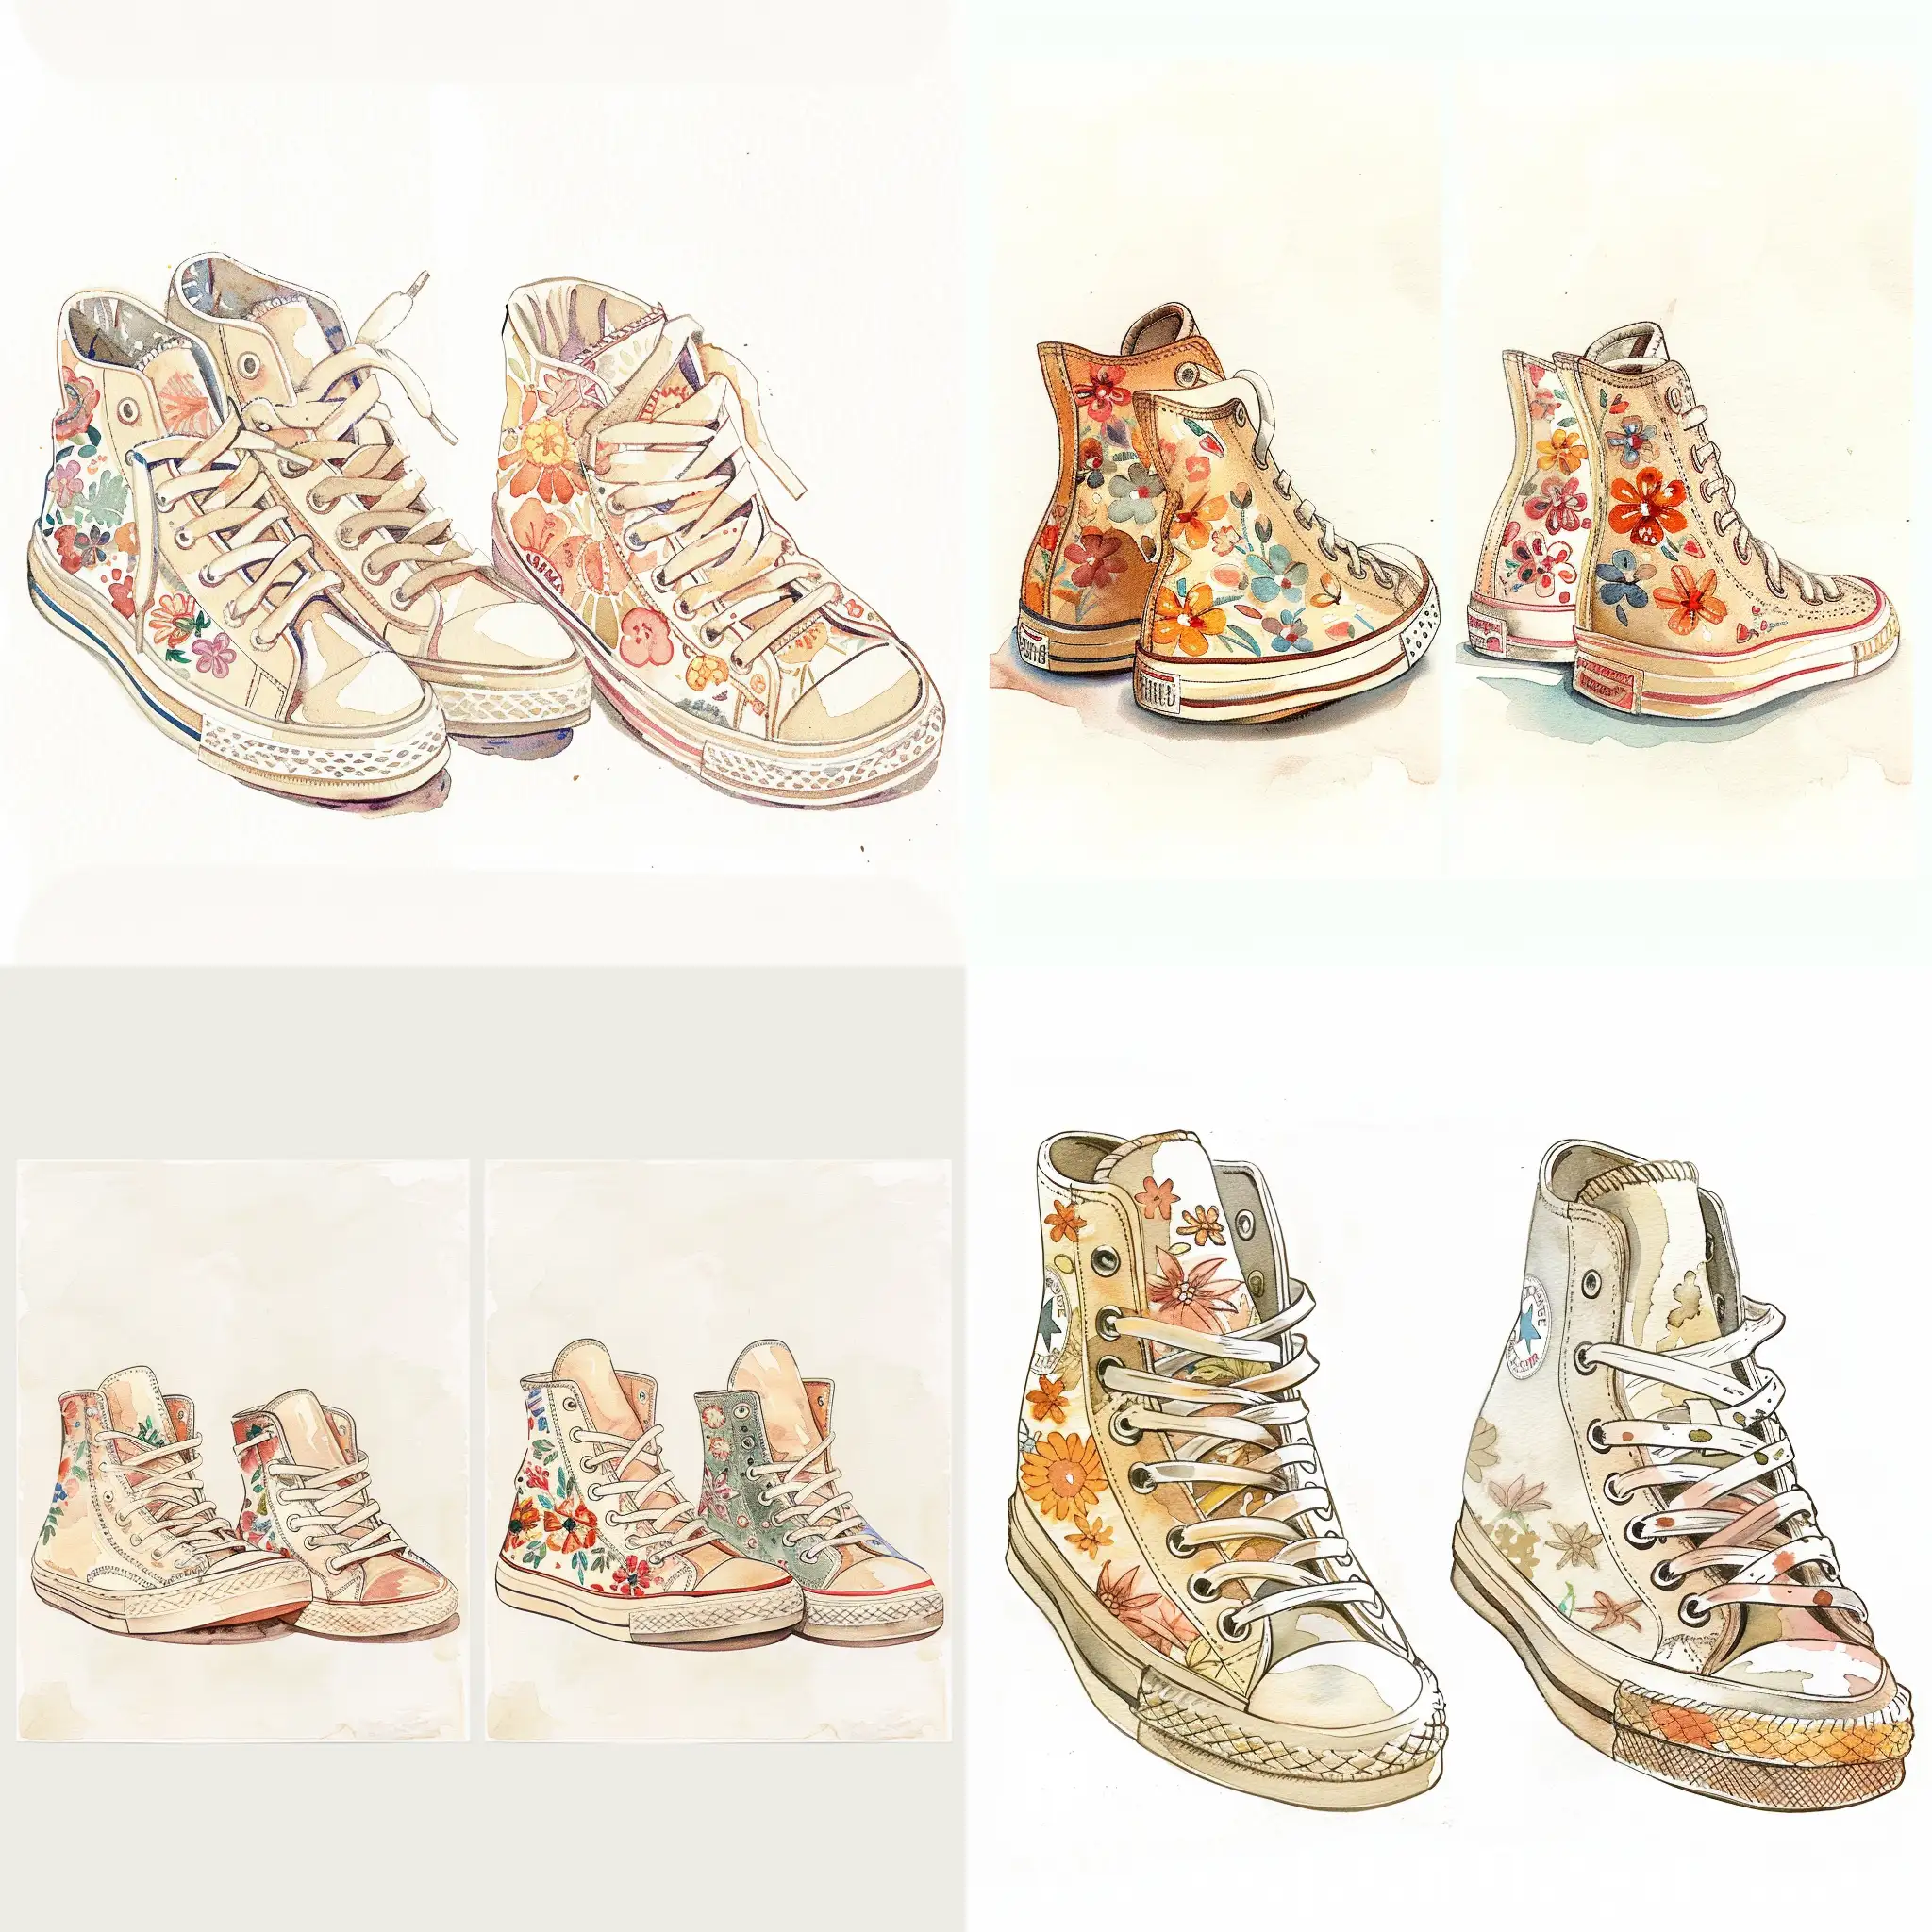 A charming set of two vintage-inspired watercolor illustrations, each featuring an adorable pair of sneakers. The sneakers are intricately decorated with whimsical floral patterns, painted in warm, soft colors that evoke nostalgia and a sense of timelessness. The background is pristine white, allowing the sneakers and their detailed designs to stand out. The overall aesthetic of these illustrations is reminiscent of a bygone era, capturing the essence of vintage allure and eliciting a feeling of beauty and delight.--v 1:: --v 6 --ar 16:9